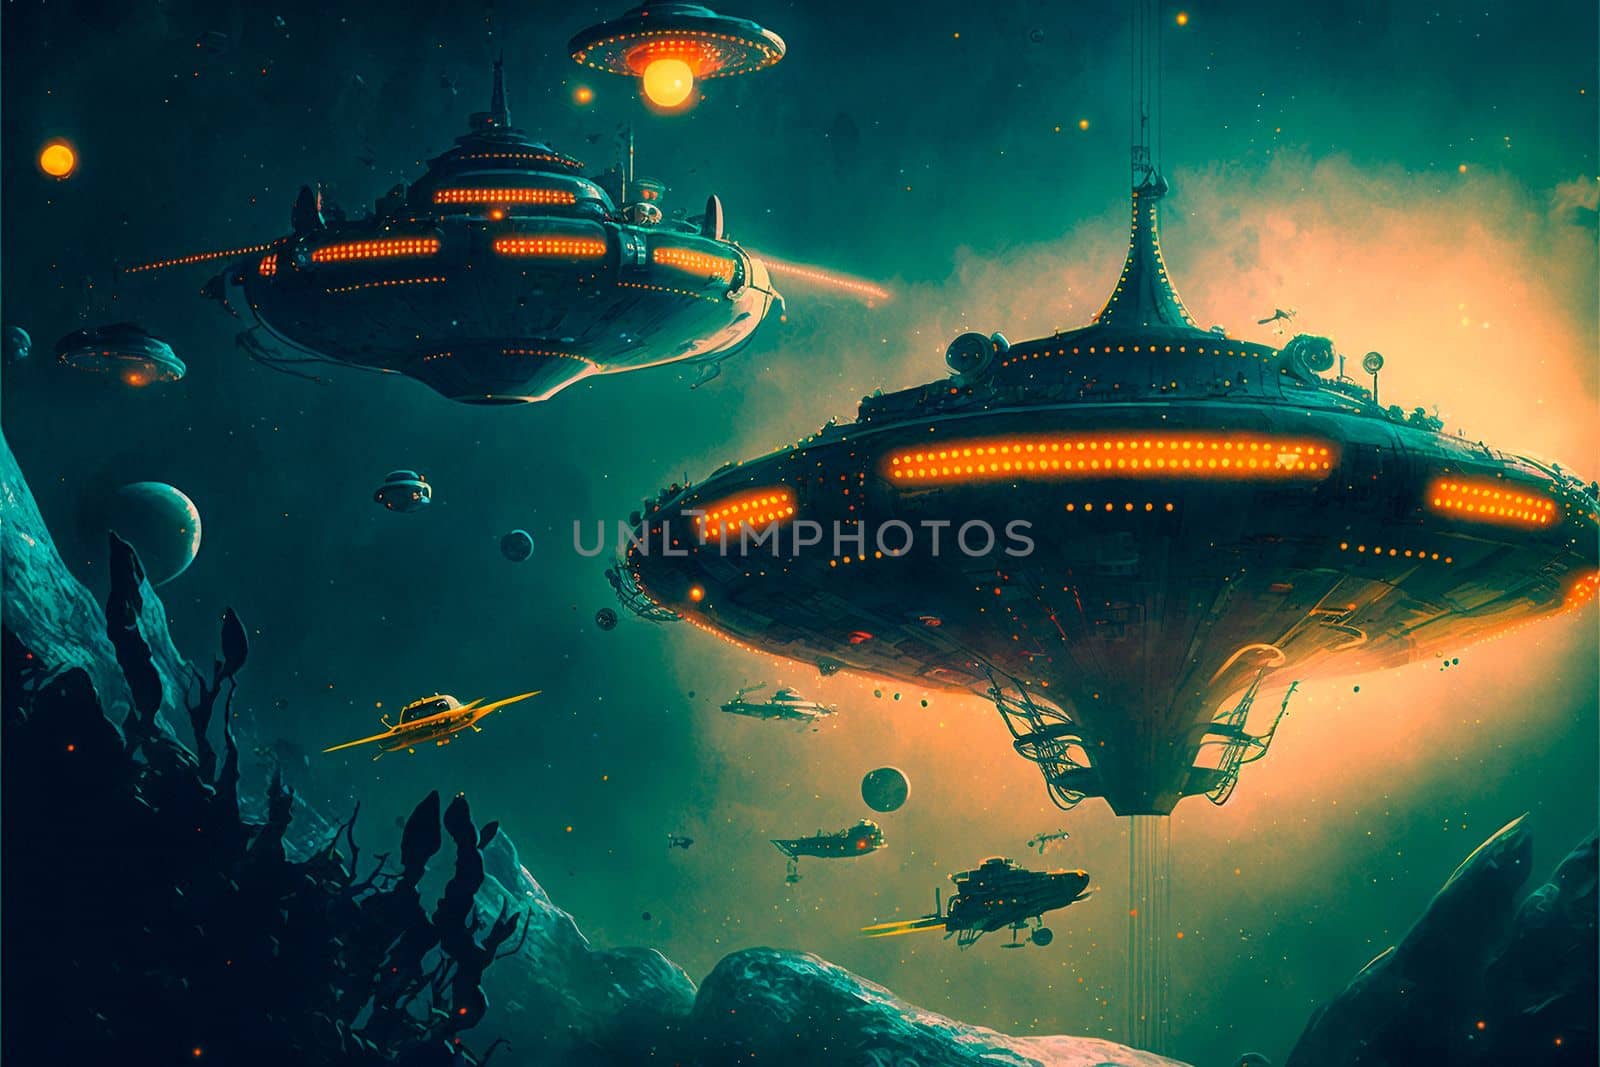 intergalactic spaceships on the background of planets and space. High quality illustration